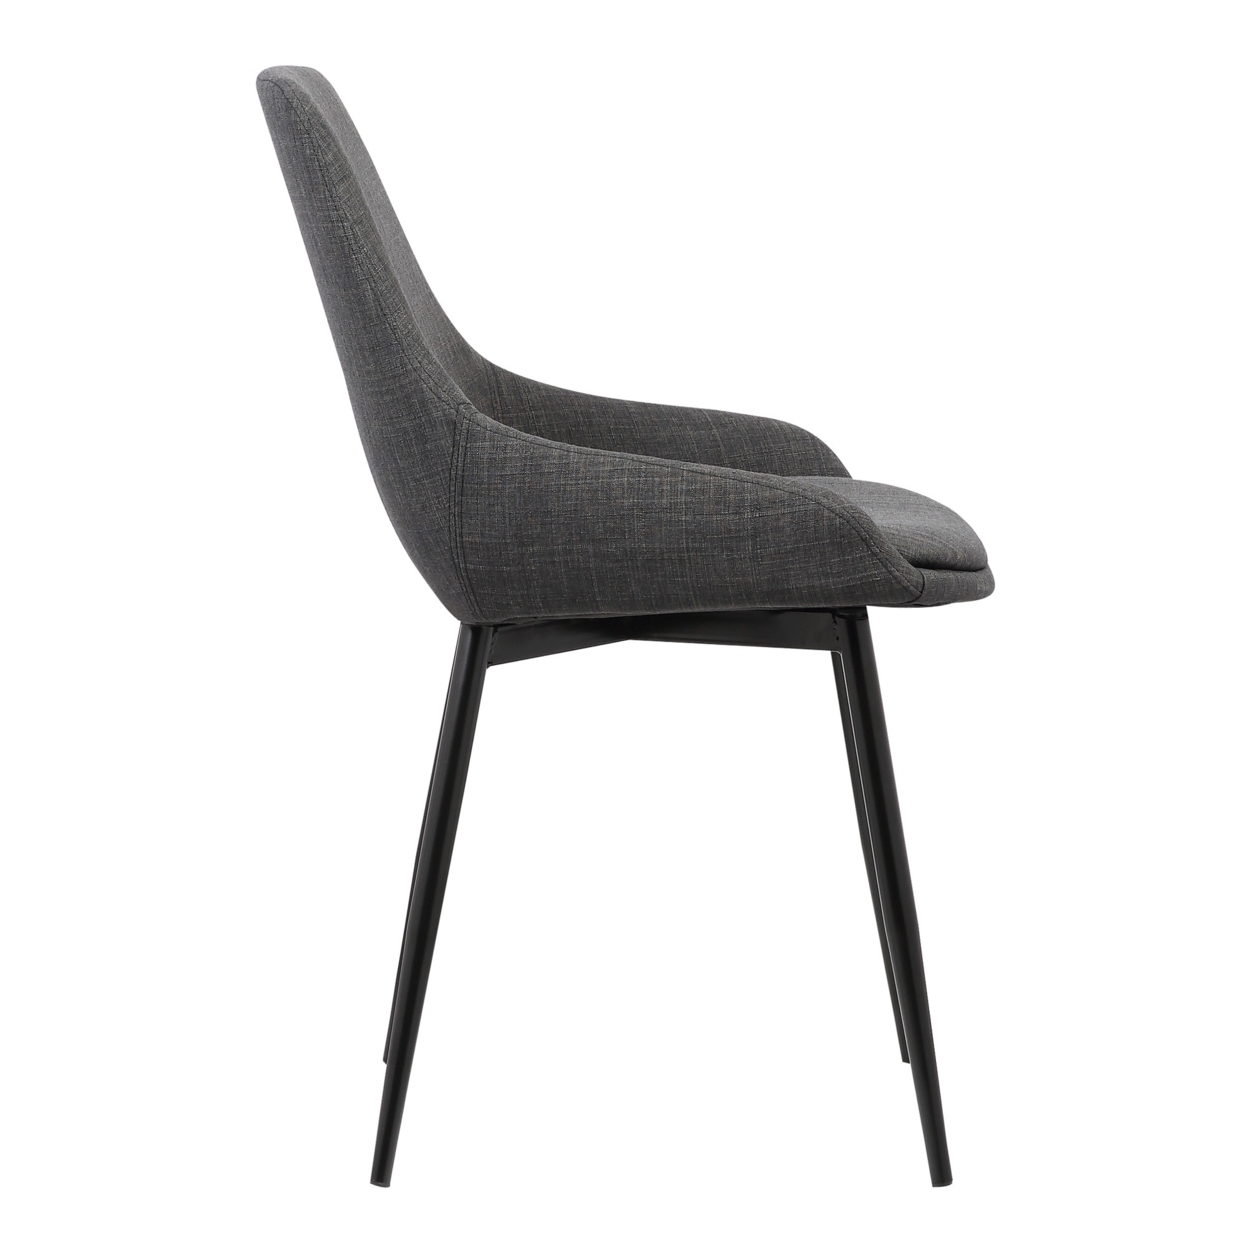 Fabric Upholstered Dining Chair With Metal Legs, Black And Gray- Saltoro Sherpi